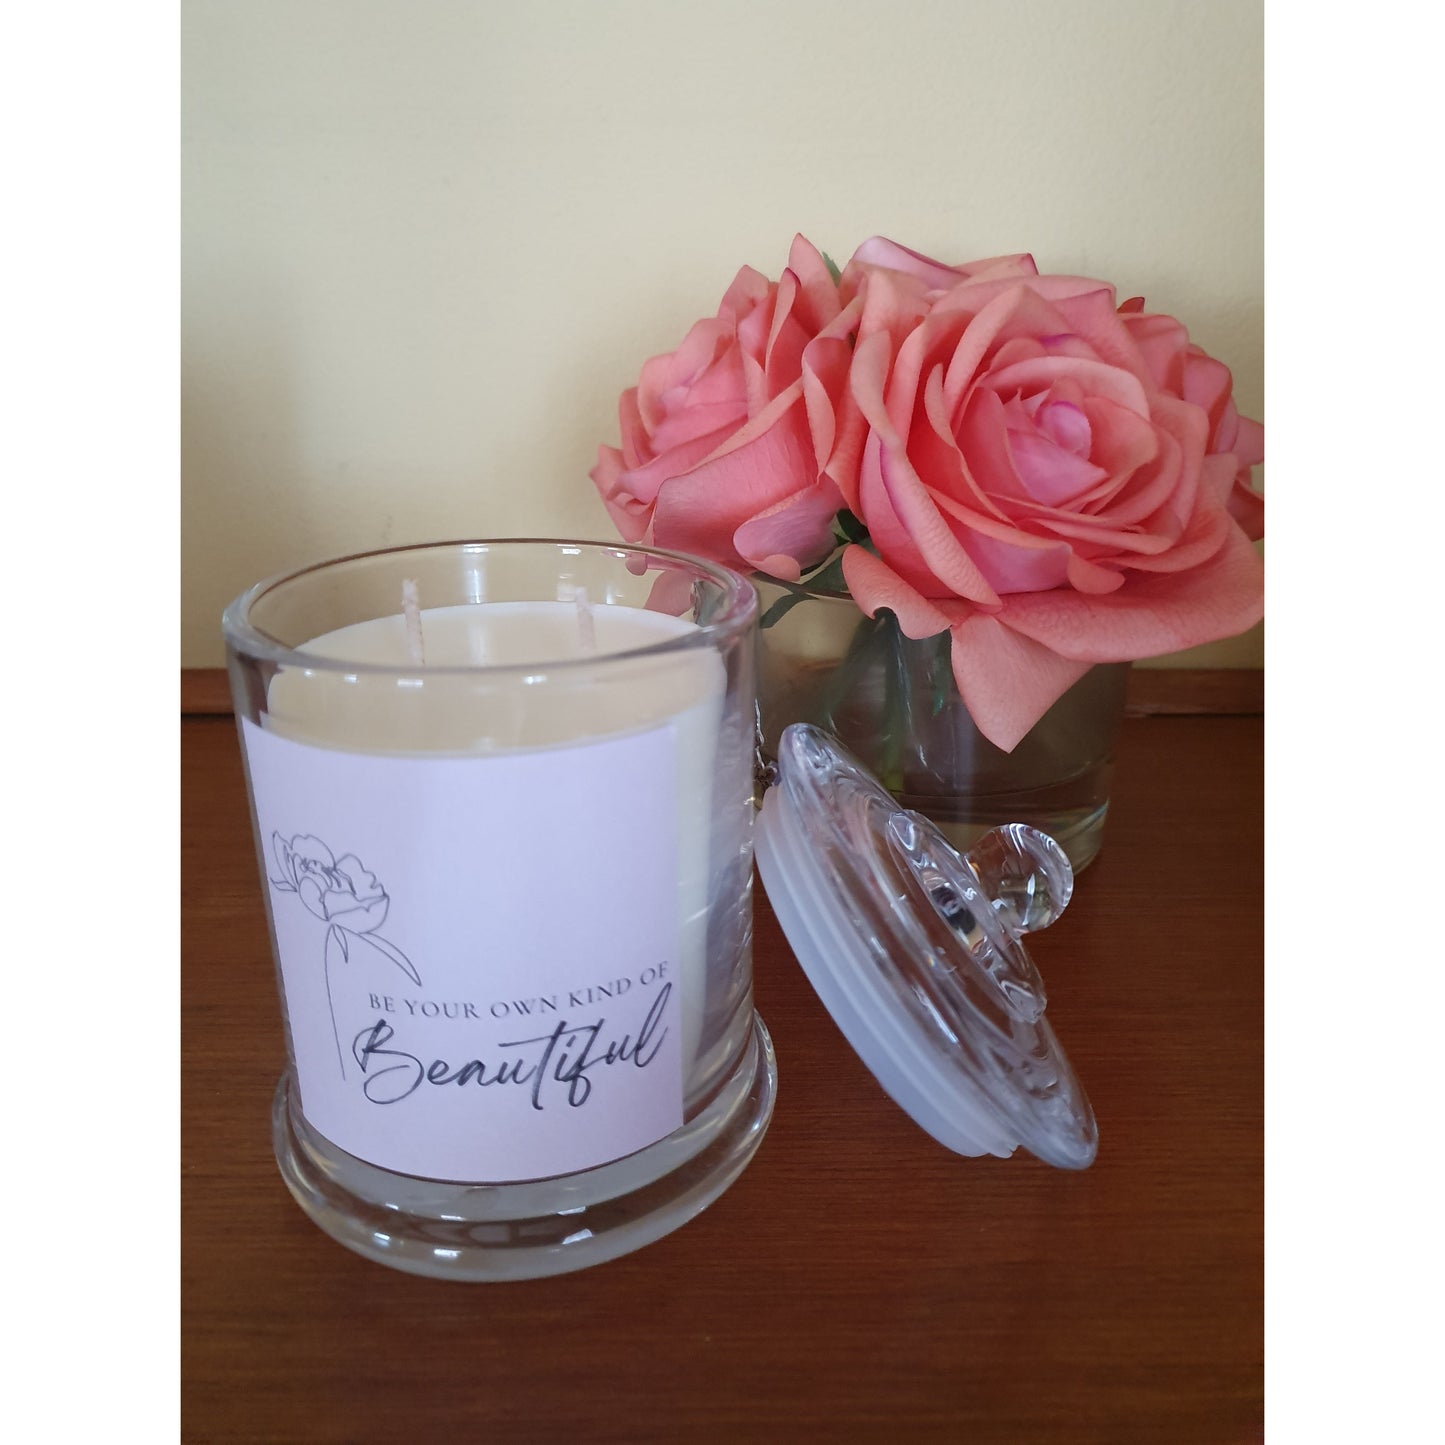 Inspirational Quote Candle- Be your own Kind of Beautiful